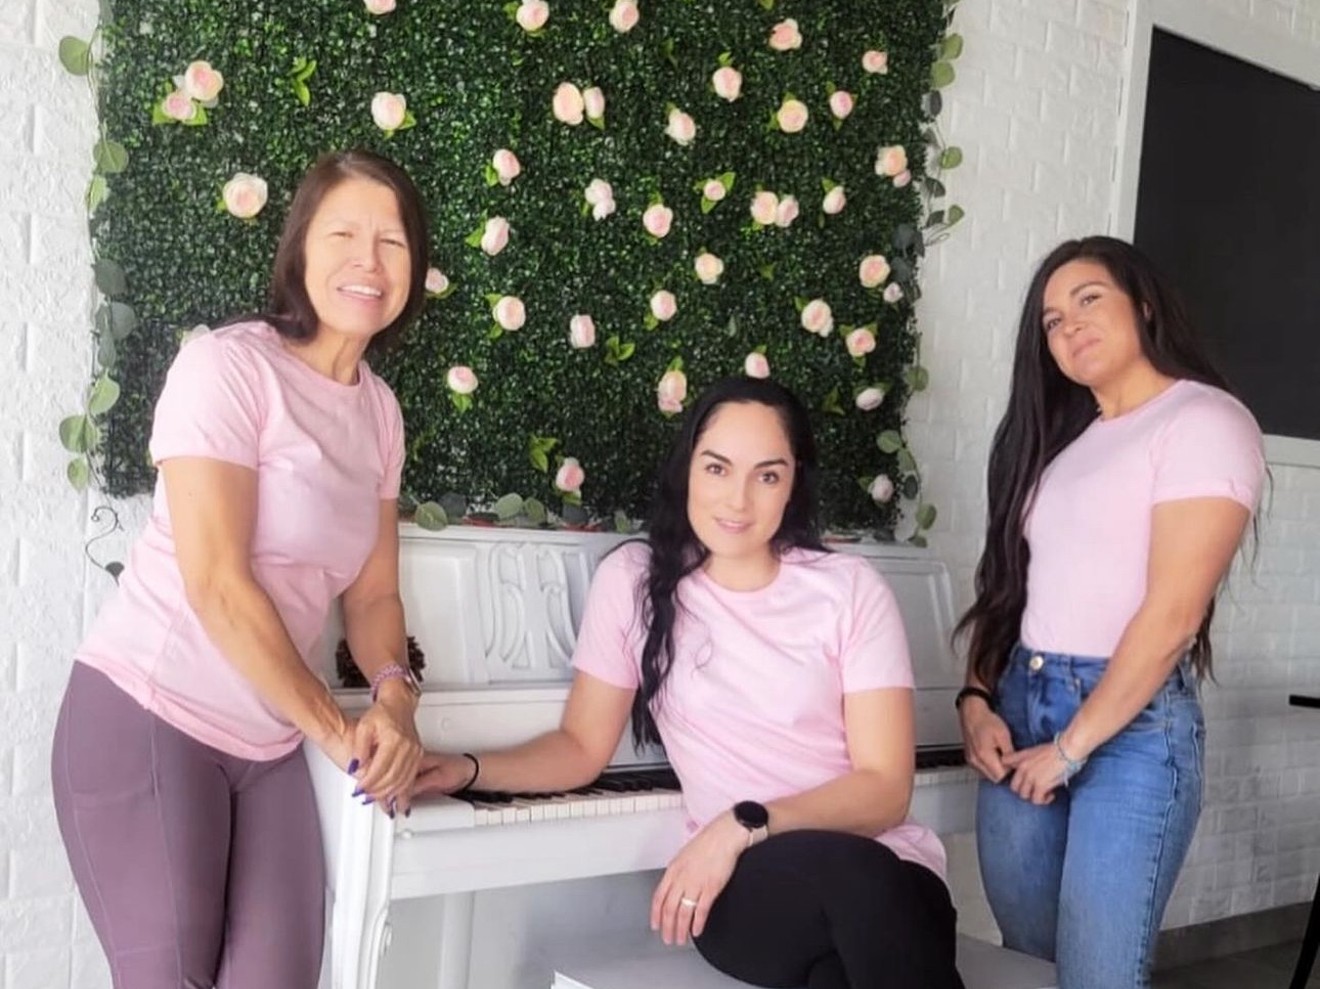 Friends Yvonne Allison, Celia Stewart and Secilia Zamudio have teamed up to open a bakery together.